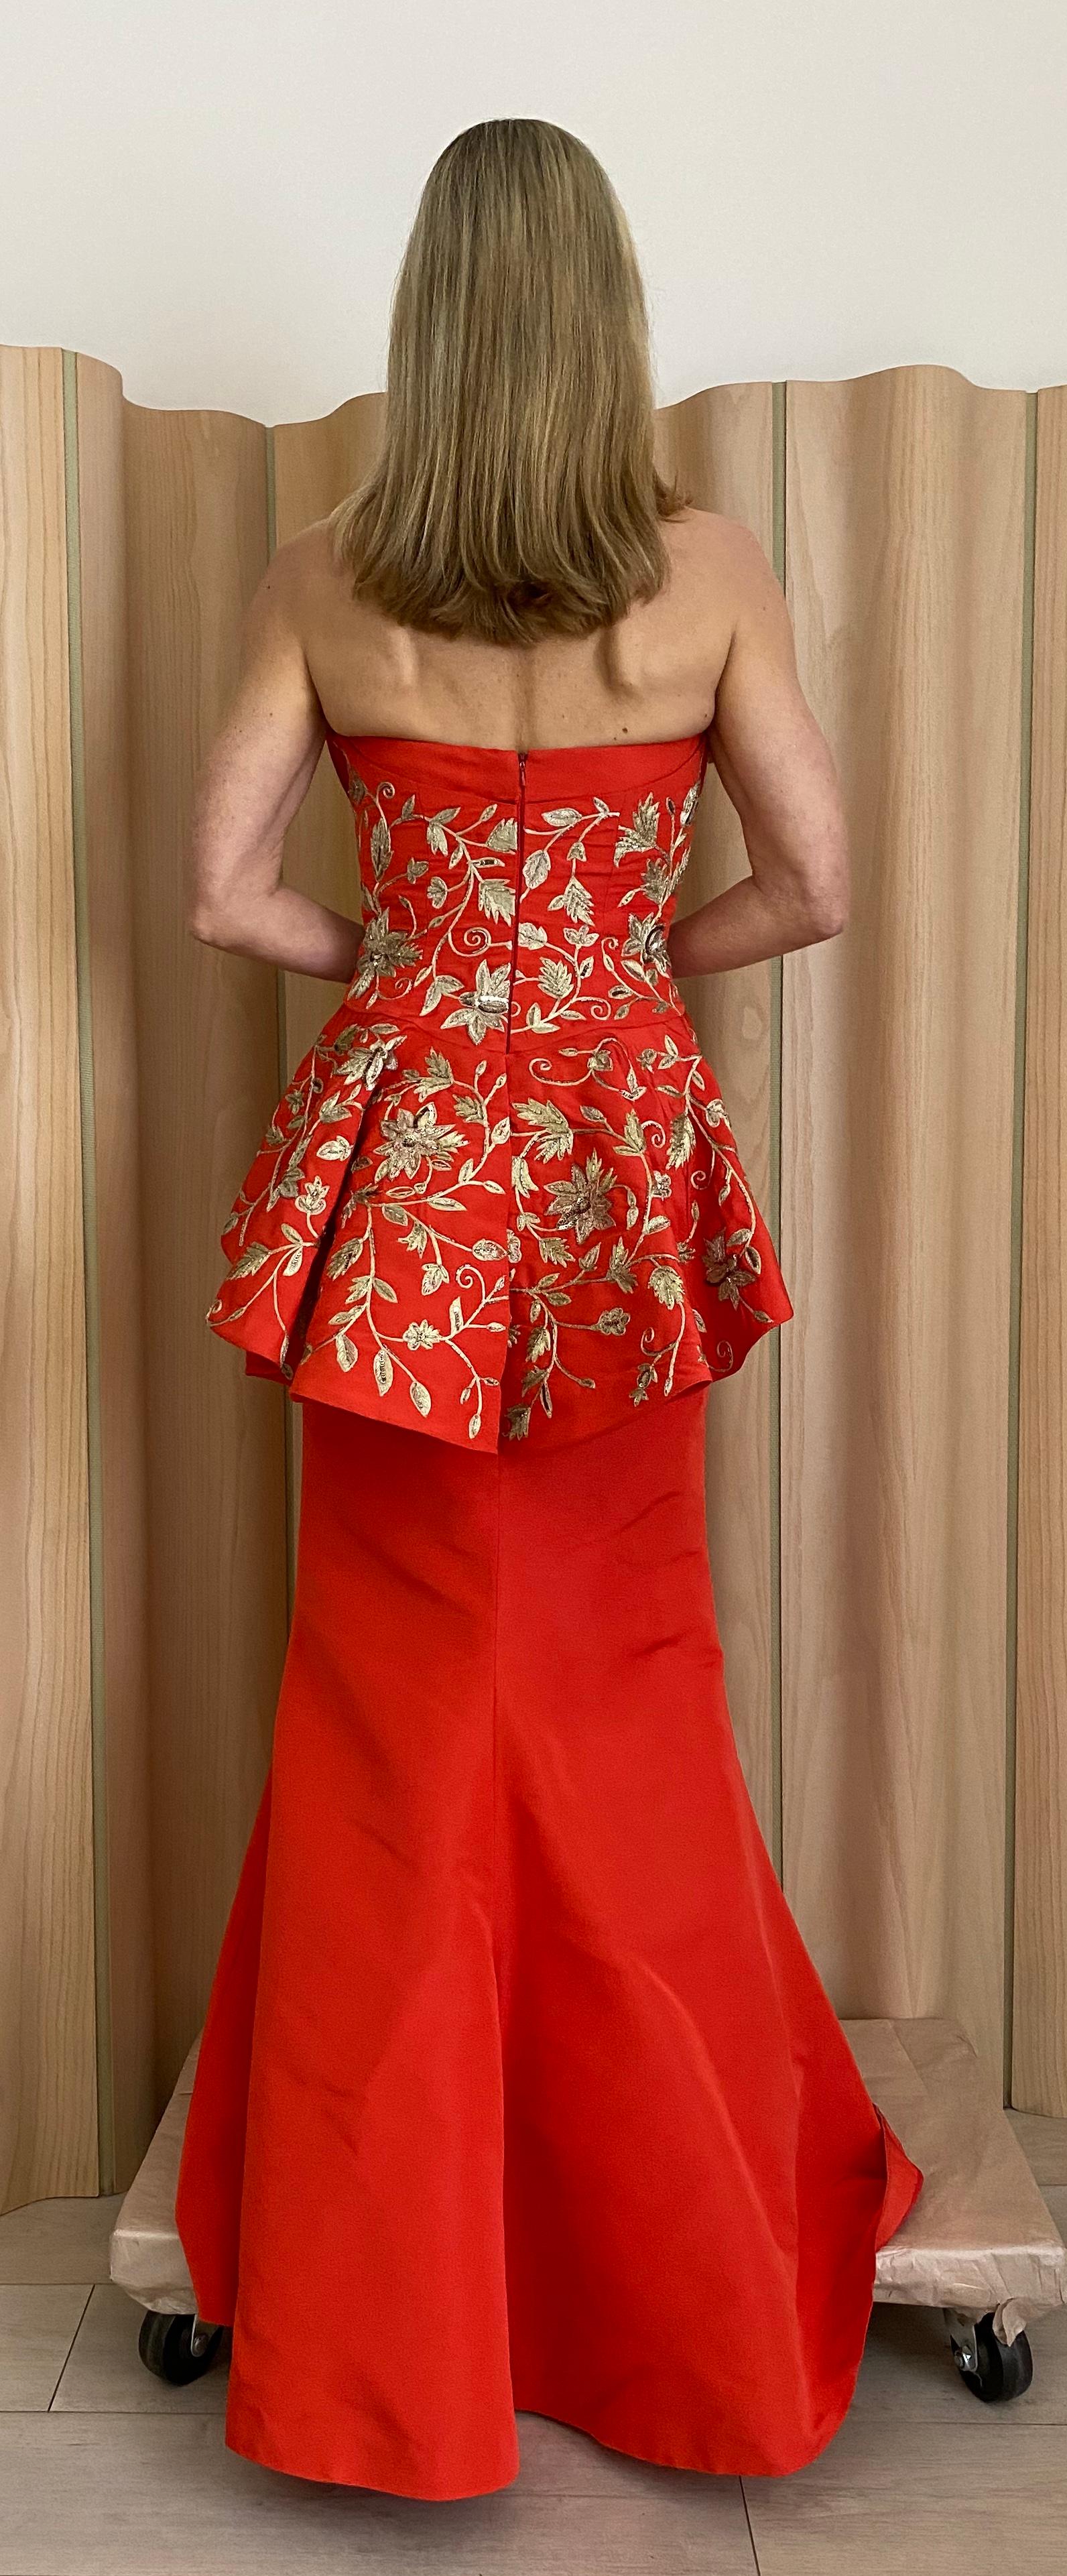 2015 Oscar De La Renta Strapless Tangerine Red Silk Peplum Gown with metallic silk embroidery.
Gown is in excellent condition. Marked size : 6 but fit small 4 ( see measurement)
Measurement: 
Bust : 30” / Waist: 26” / Hip : 36” / Front length 52”/